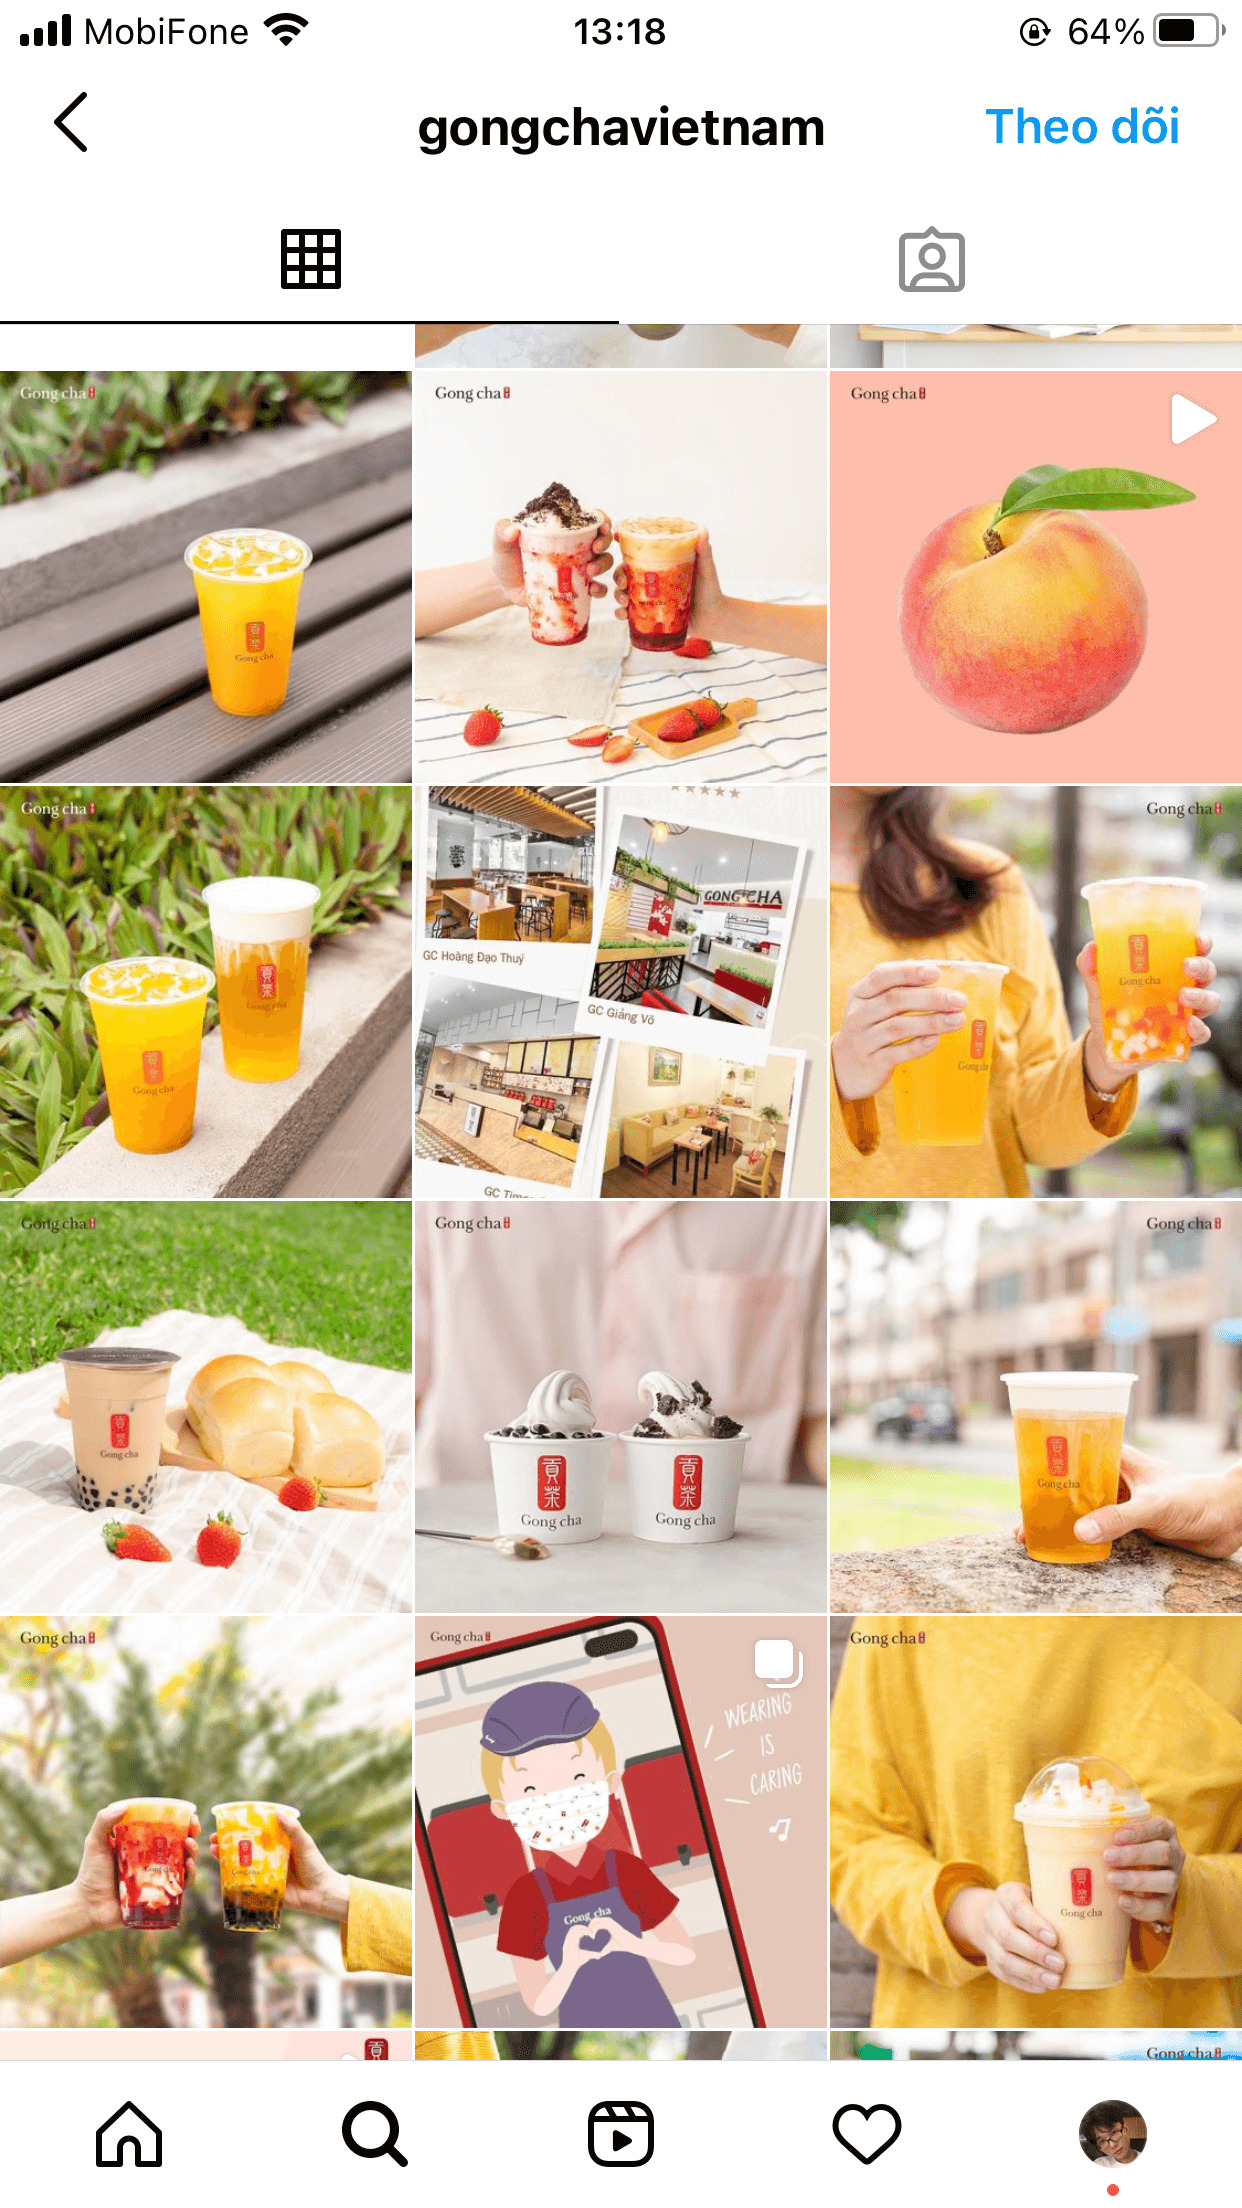 The pastel palette makes the brand Instagram feed looks cheerful 